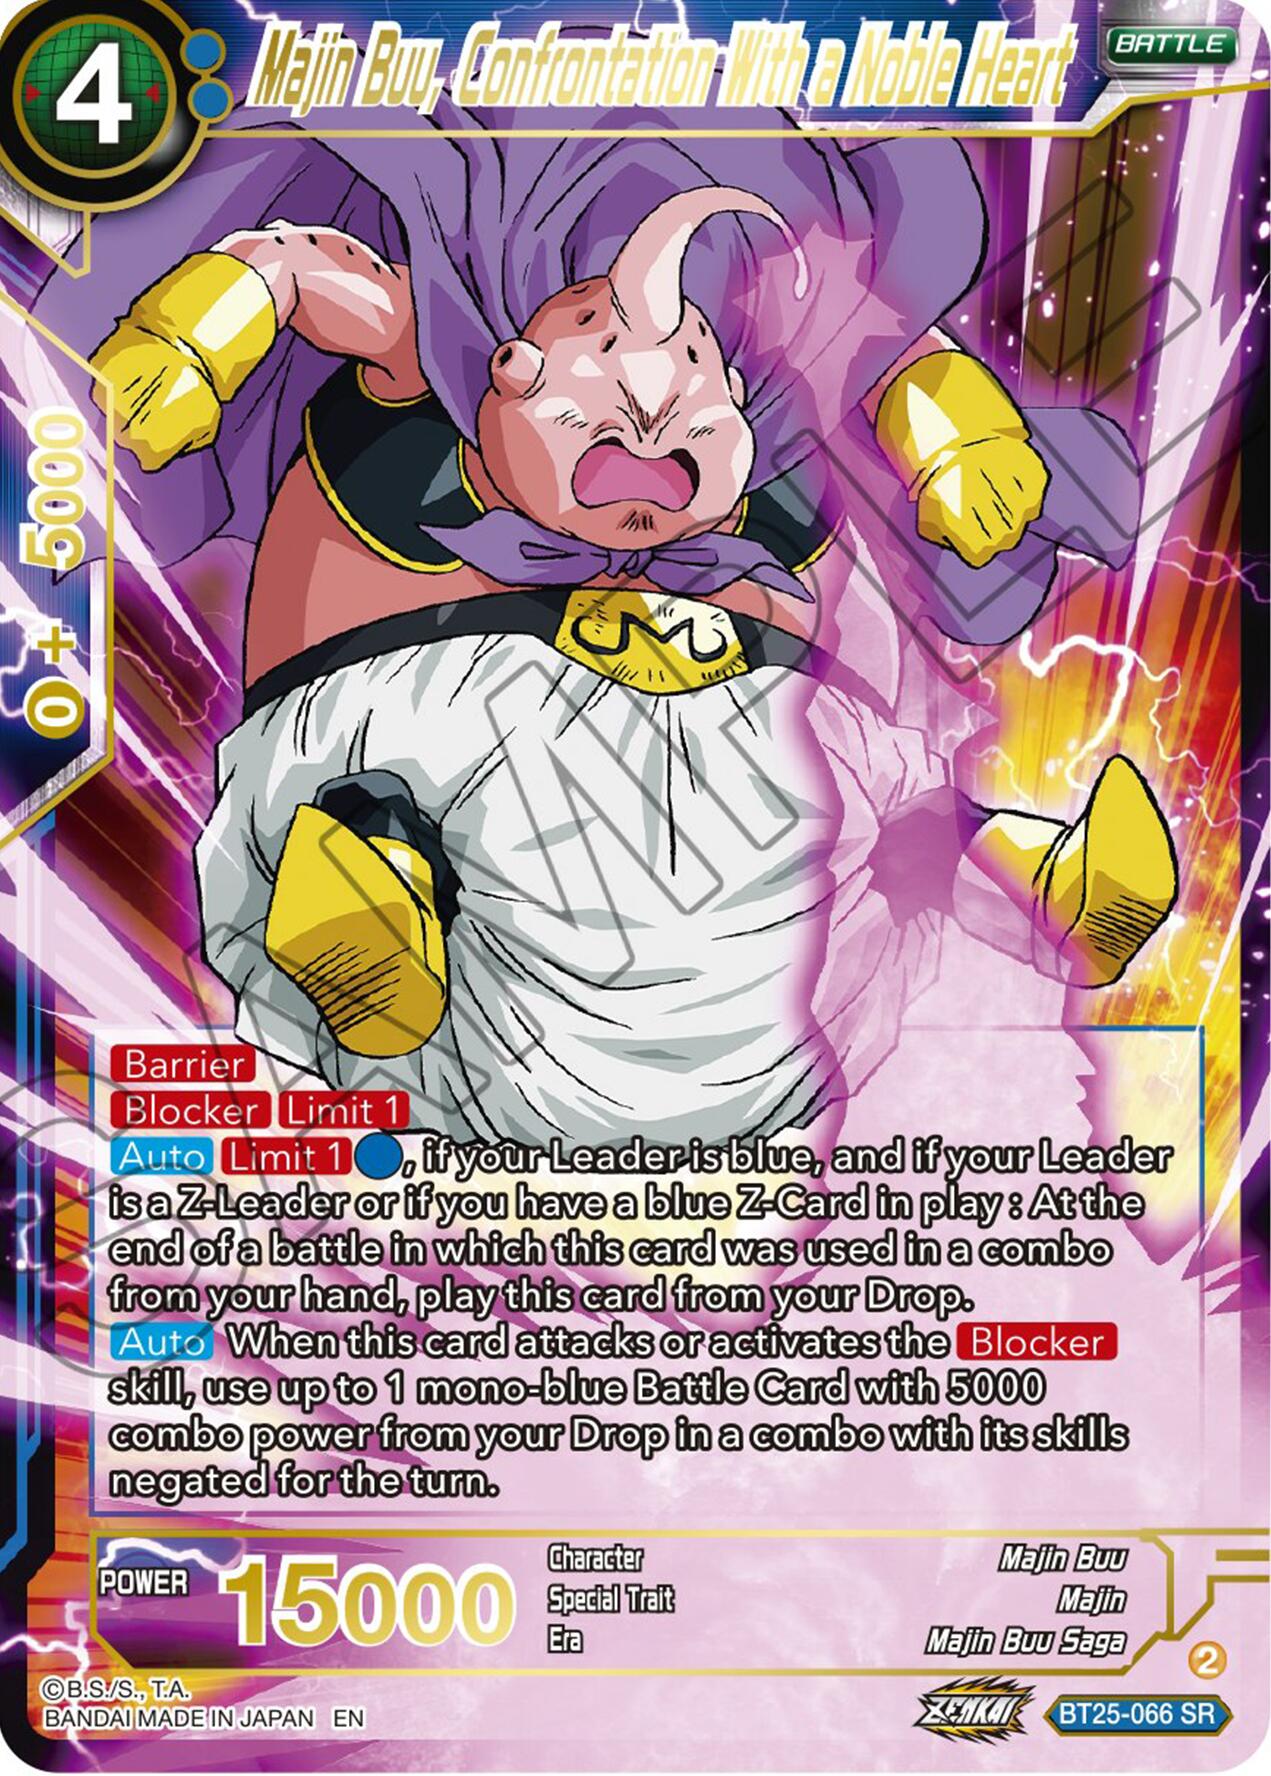 Majin Buu, Confrontaliter With a Mobile Heat (BT25-066) [Legend of the Dragon Balls] | Total Play